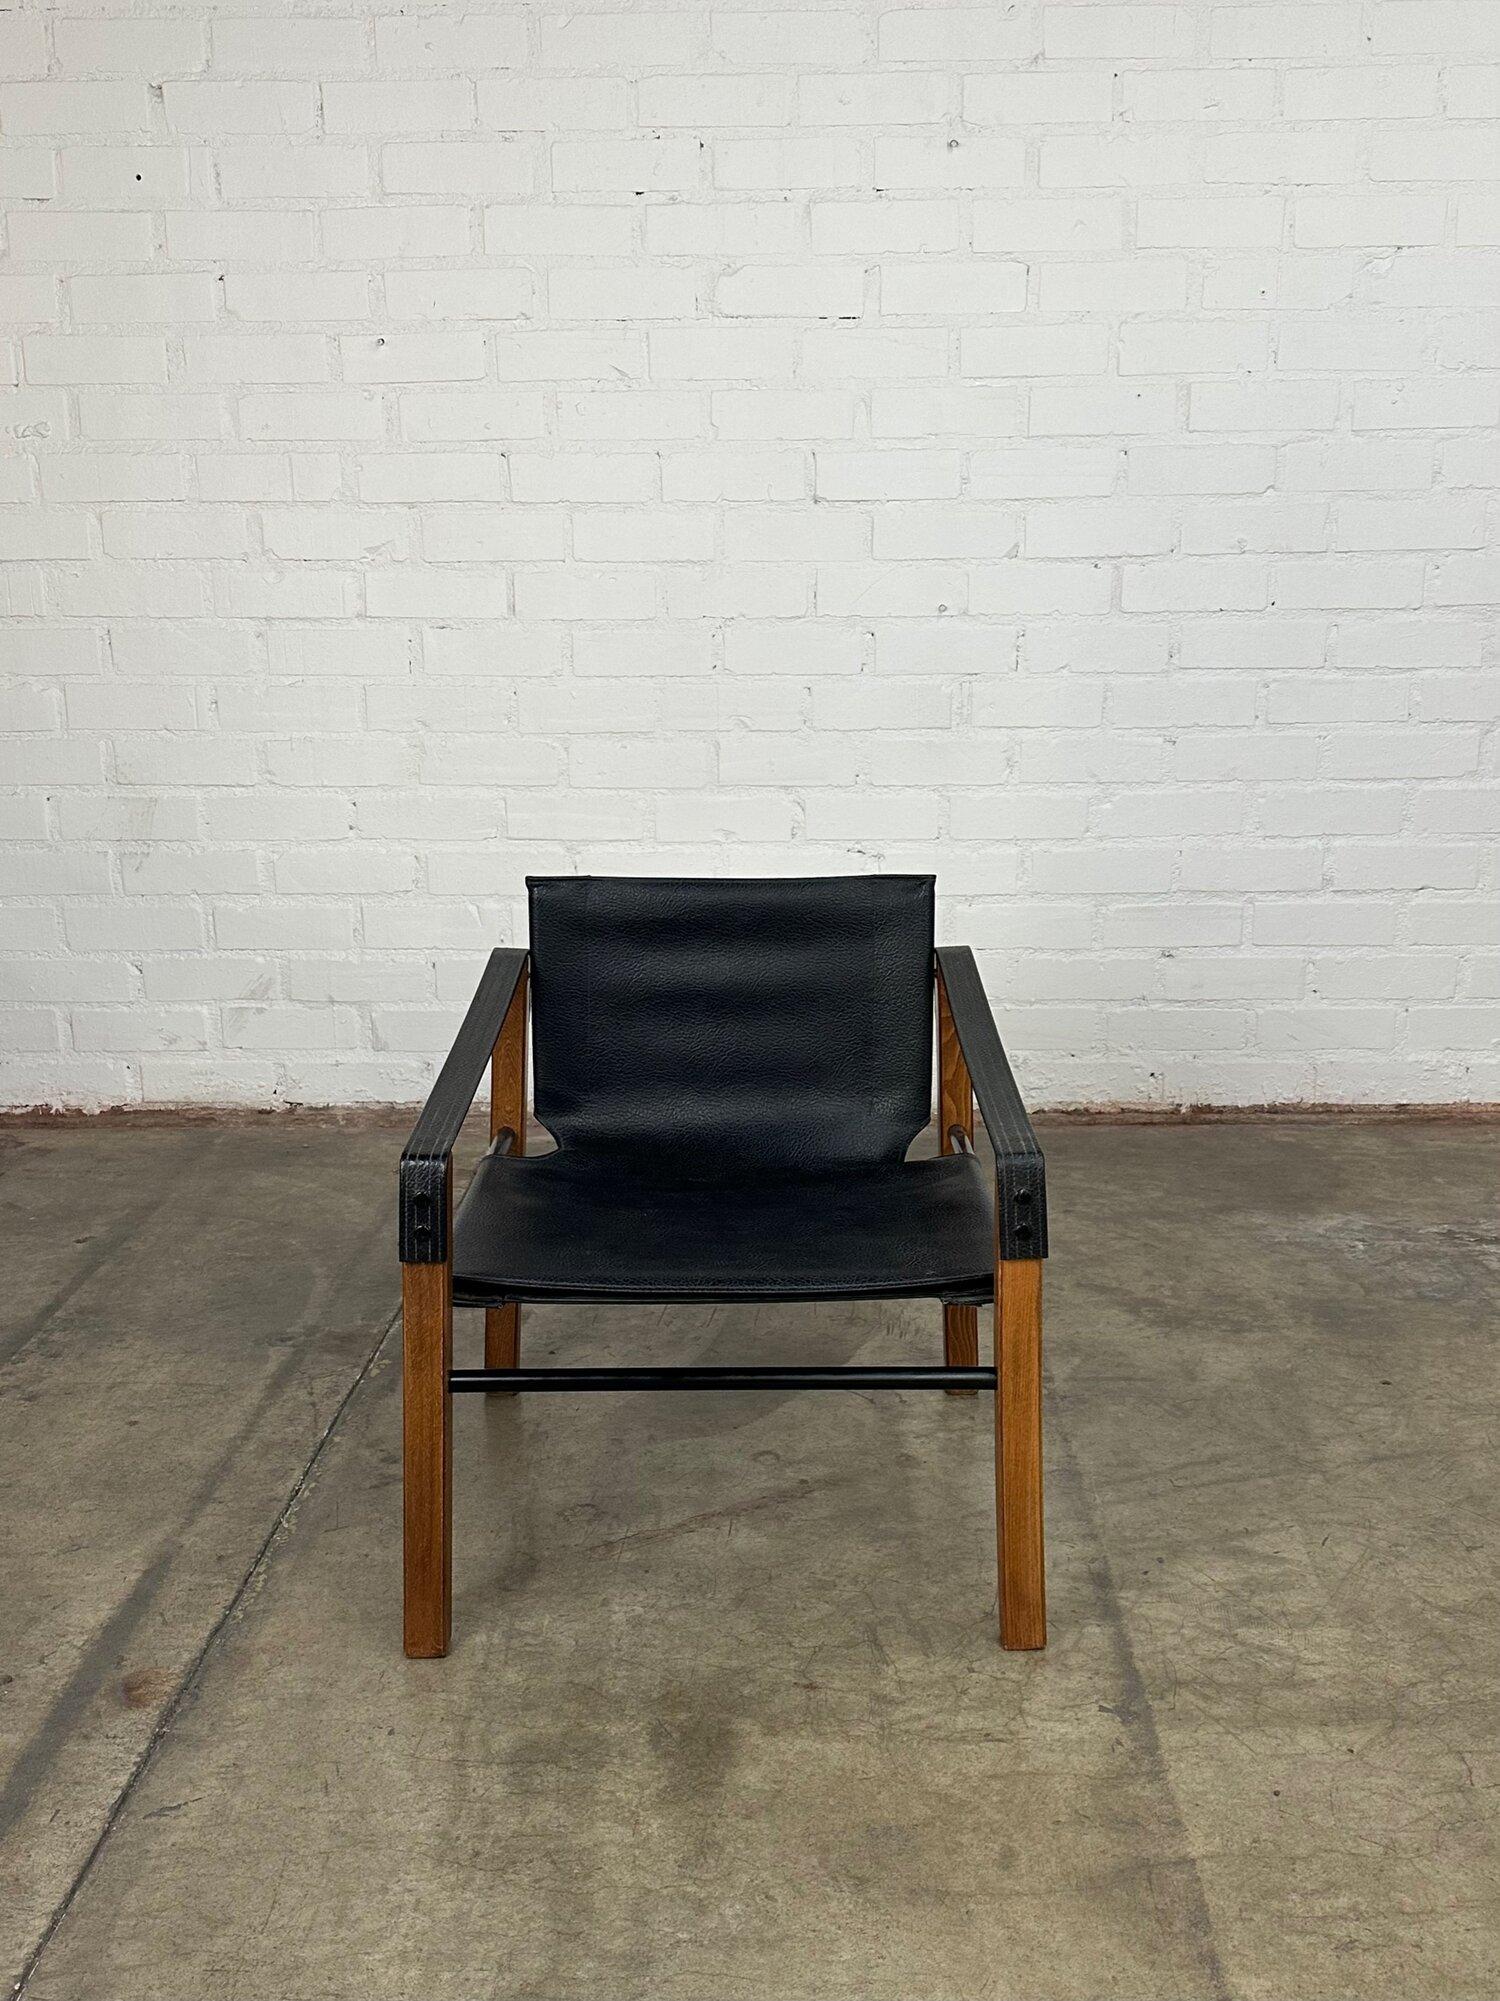 W23 D24 H26 SW23 SD18 SH14 AH20

Vintage Leather safari chair. Frame has been fully restored structurally and aesthetically. Leather is in good vintage condition with no rips.